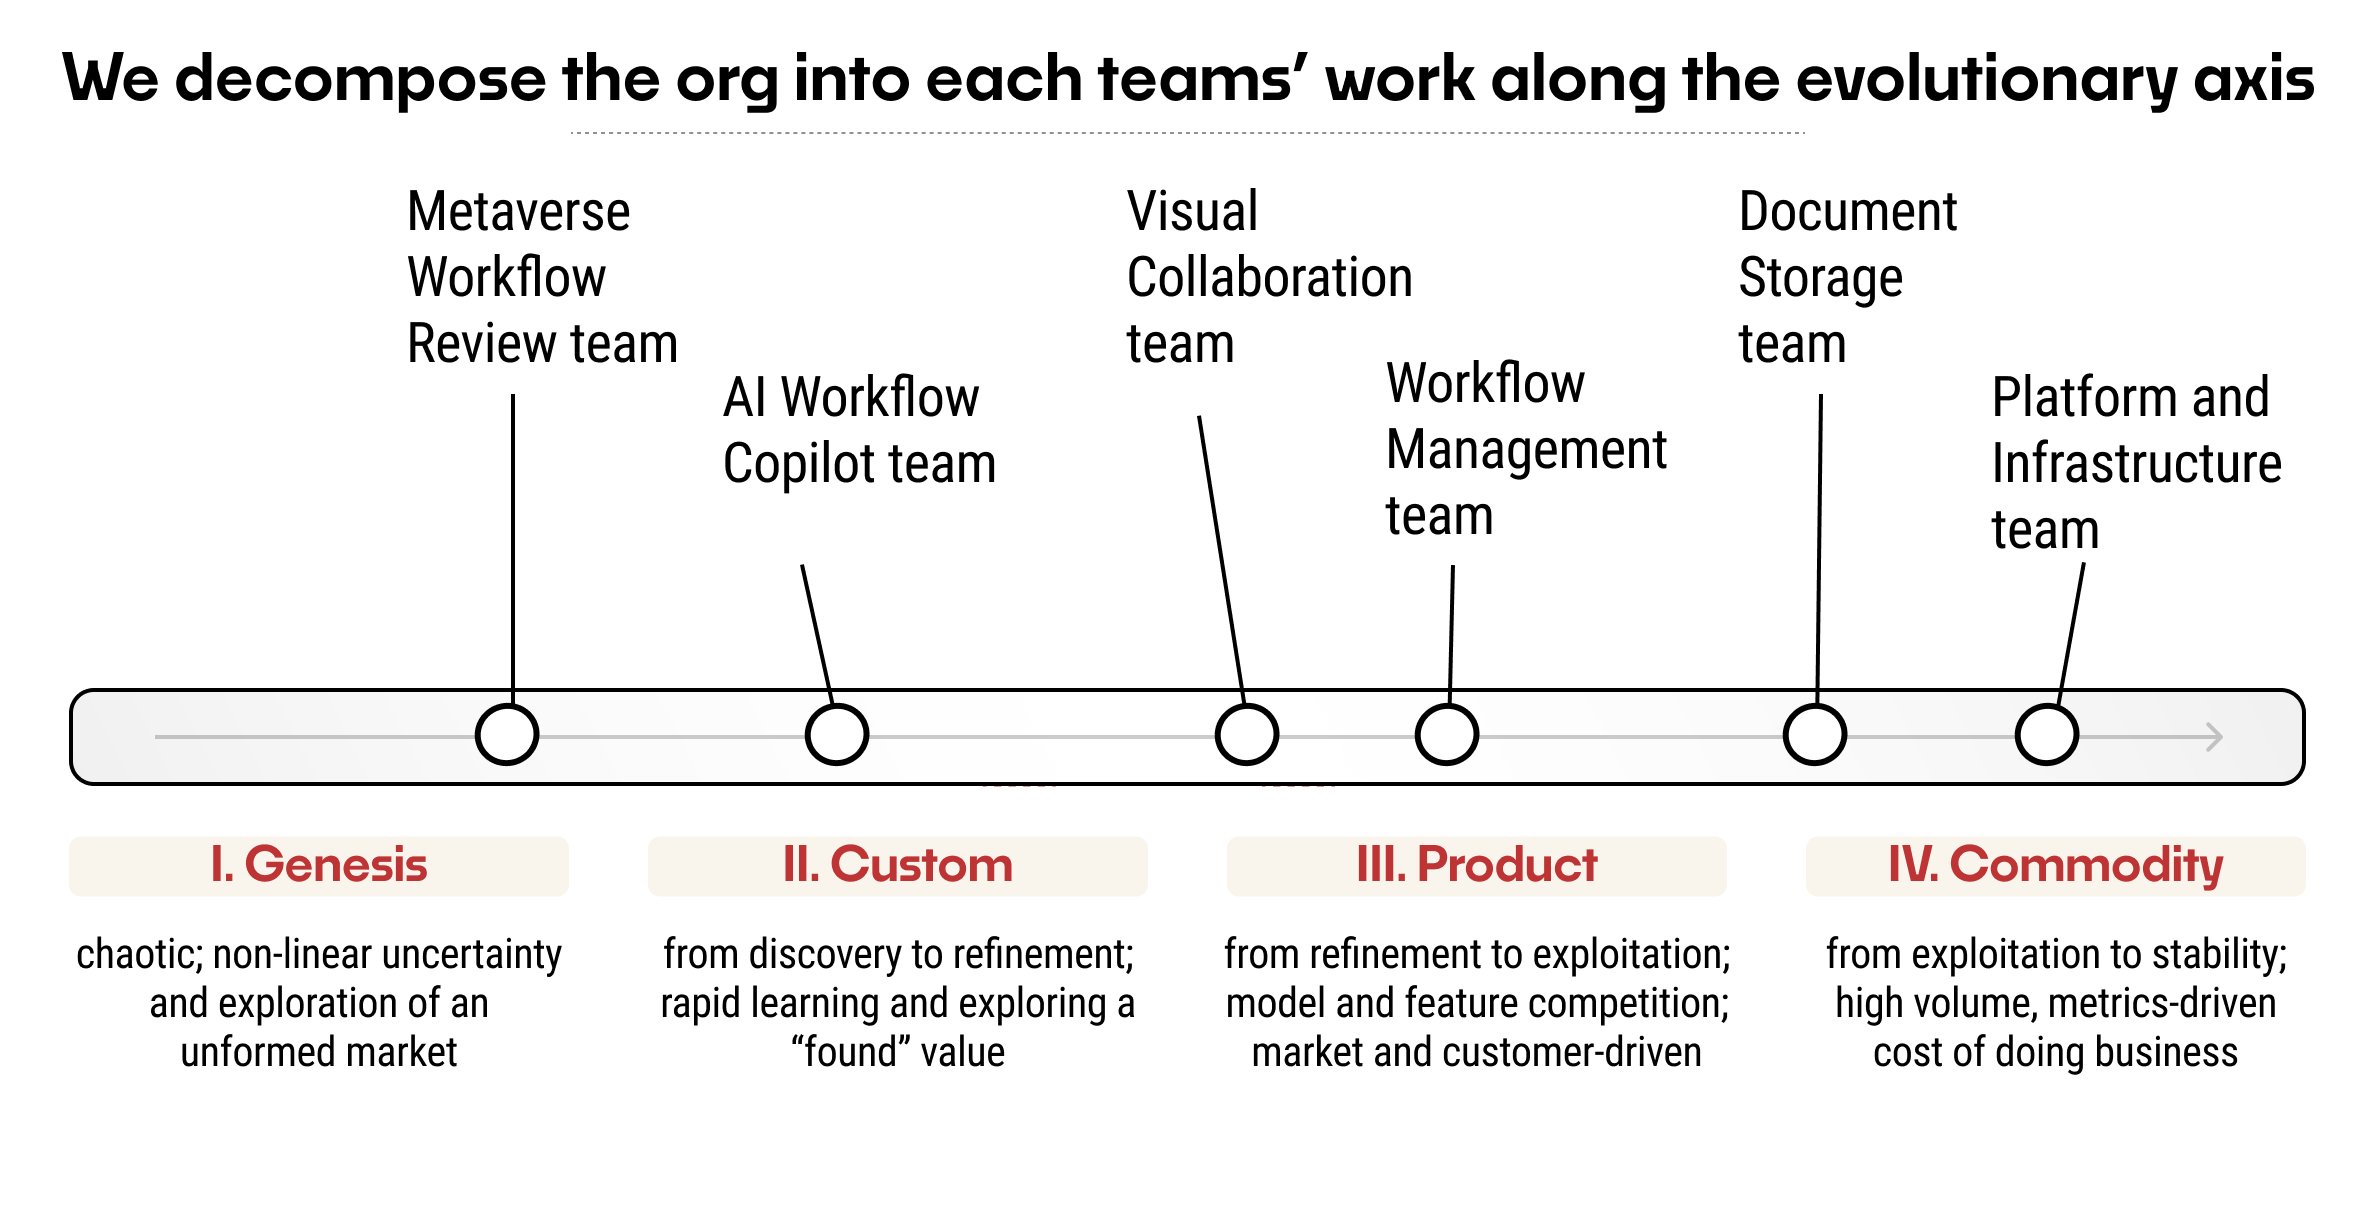 The spectrum of four stages, with 6 different teams distributed across it. From Genesis at the far left there is the "Metaverse Workflow Review team", and in Commodity at the far right is the "Platform and Infrastructure team."